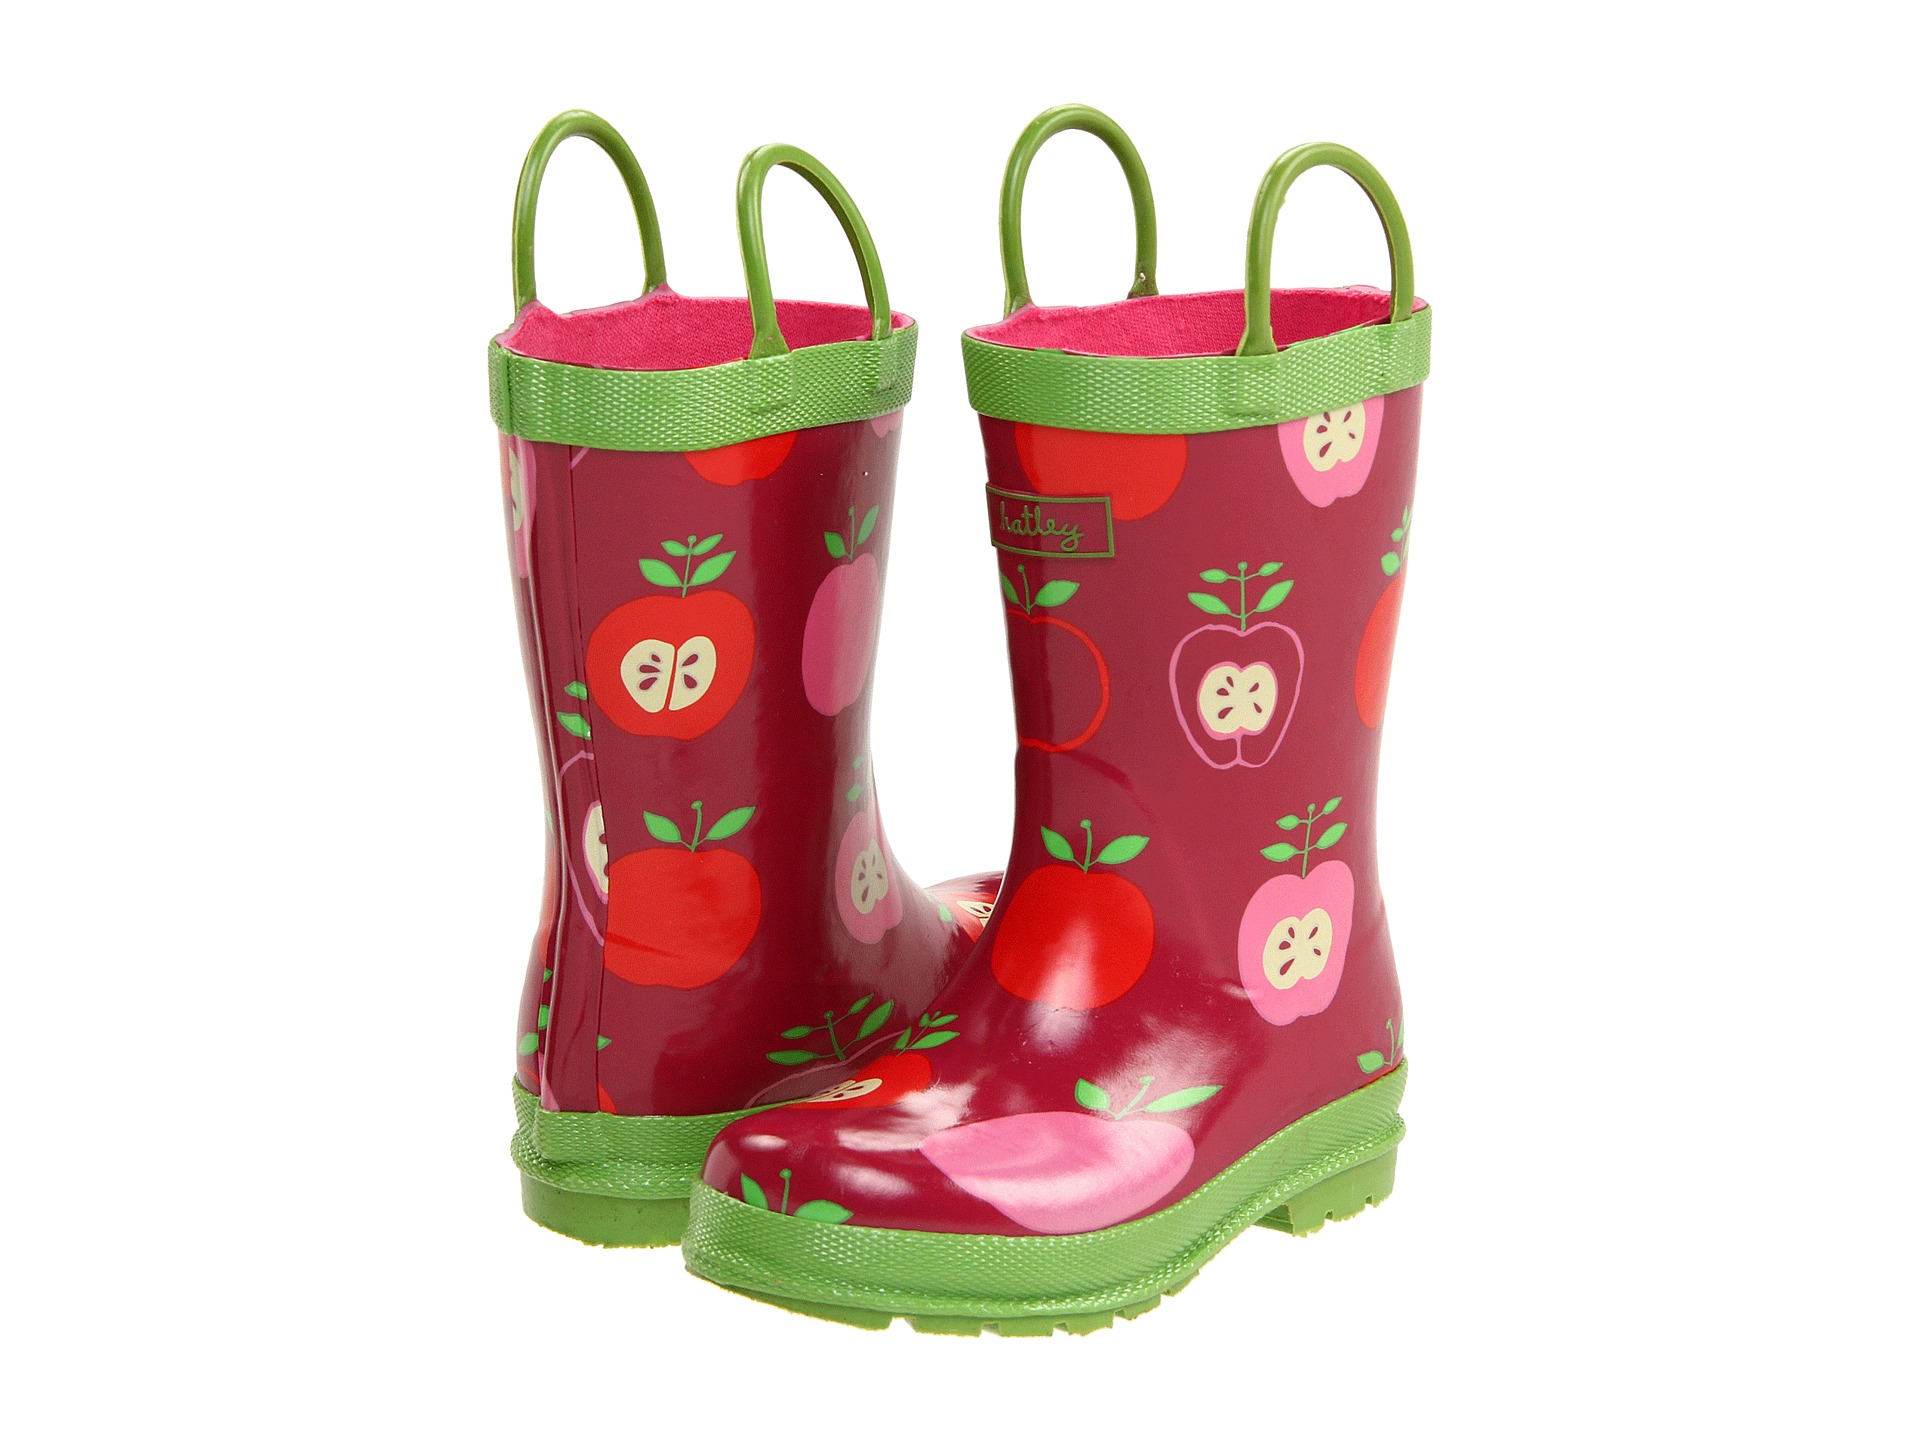 Hatley Kids Rain Boots (Infant/Toddler/Youth) 